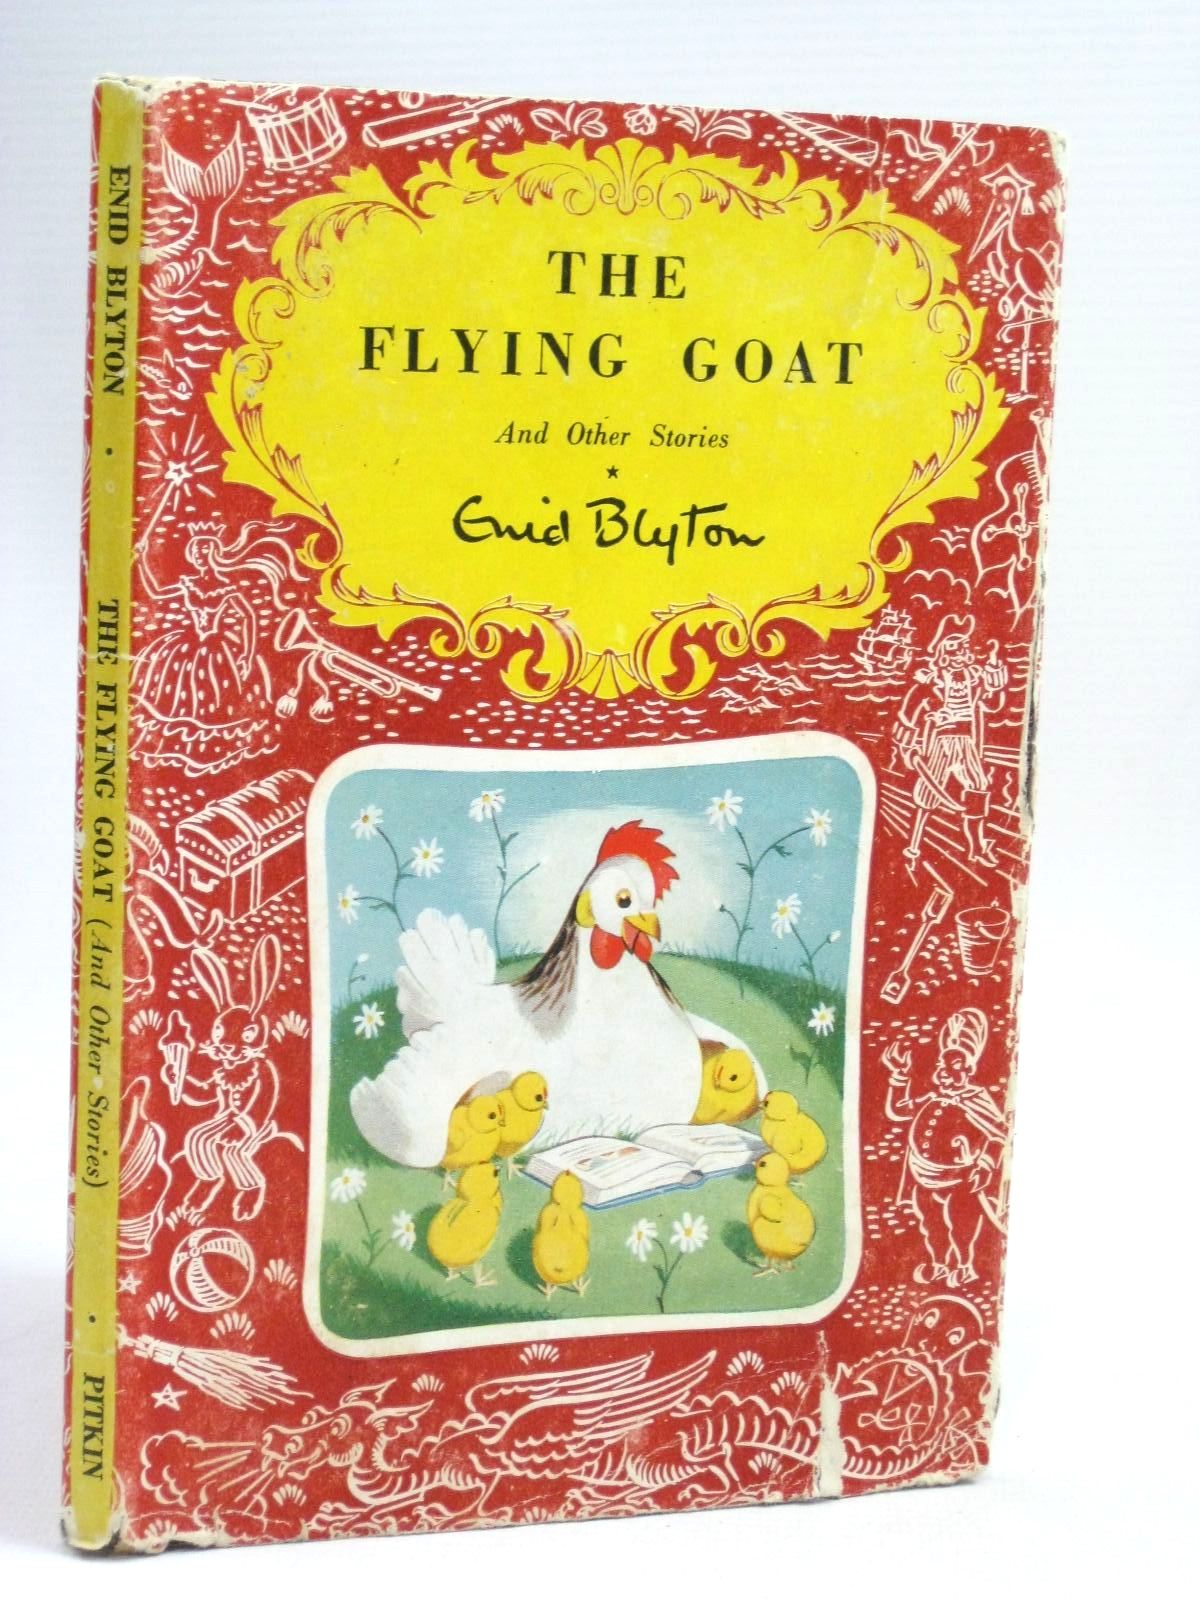 Cover of THE FLYING GOAT AND OTHER STORIES by Enid Blyton